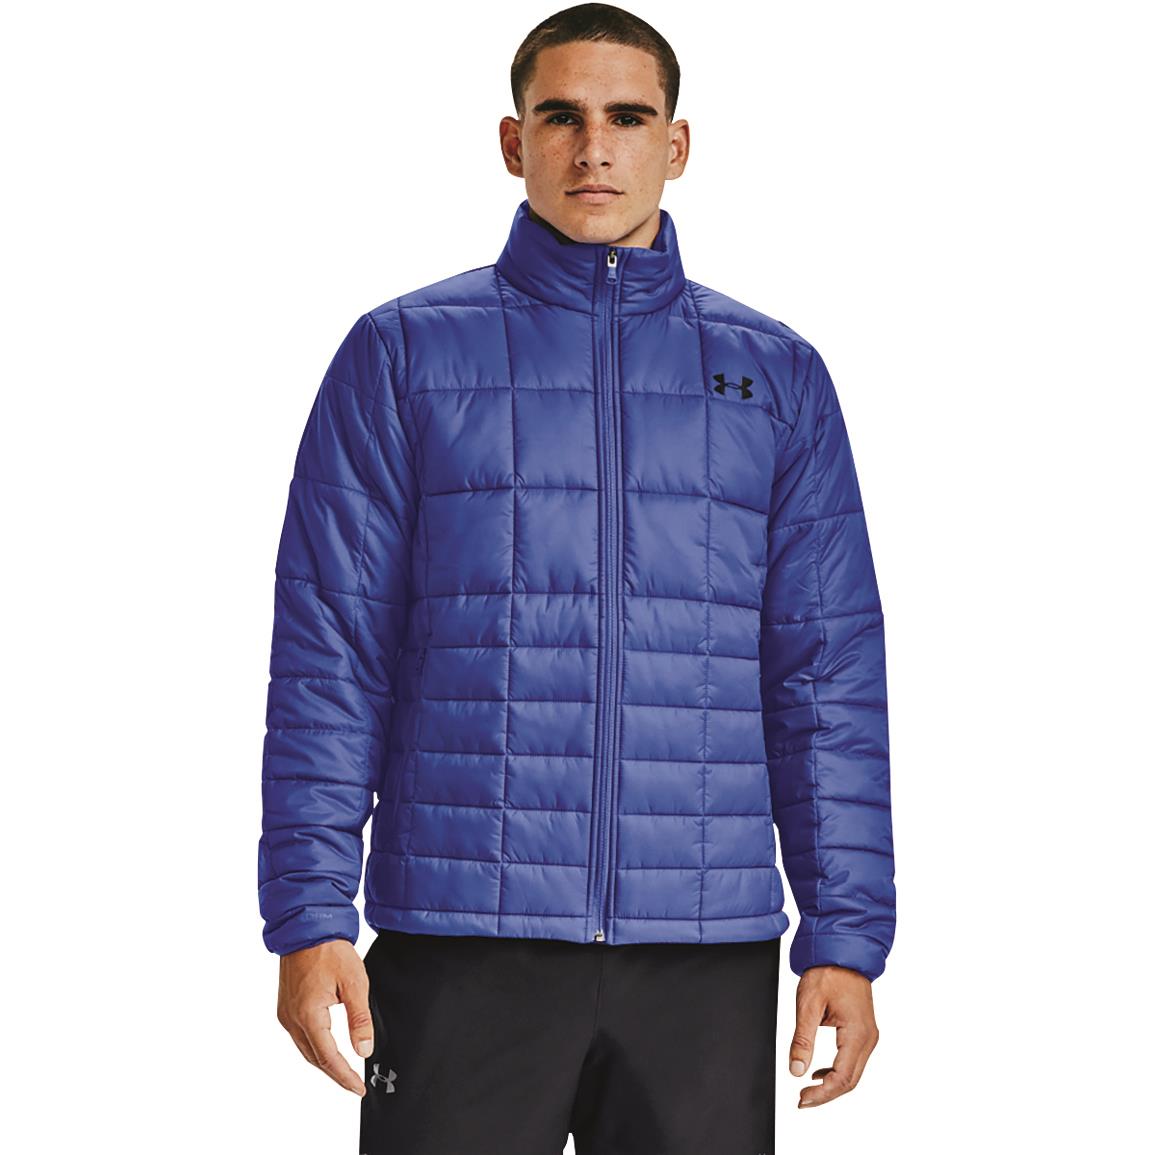 Under Armour Men's Armour Insulated Jacket - 716441, Jackets, Coats & Rain Gear at Sportsman's Guide